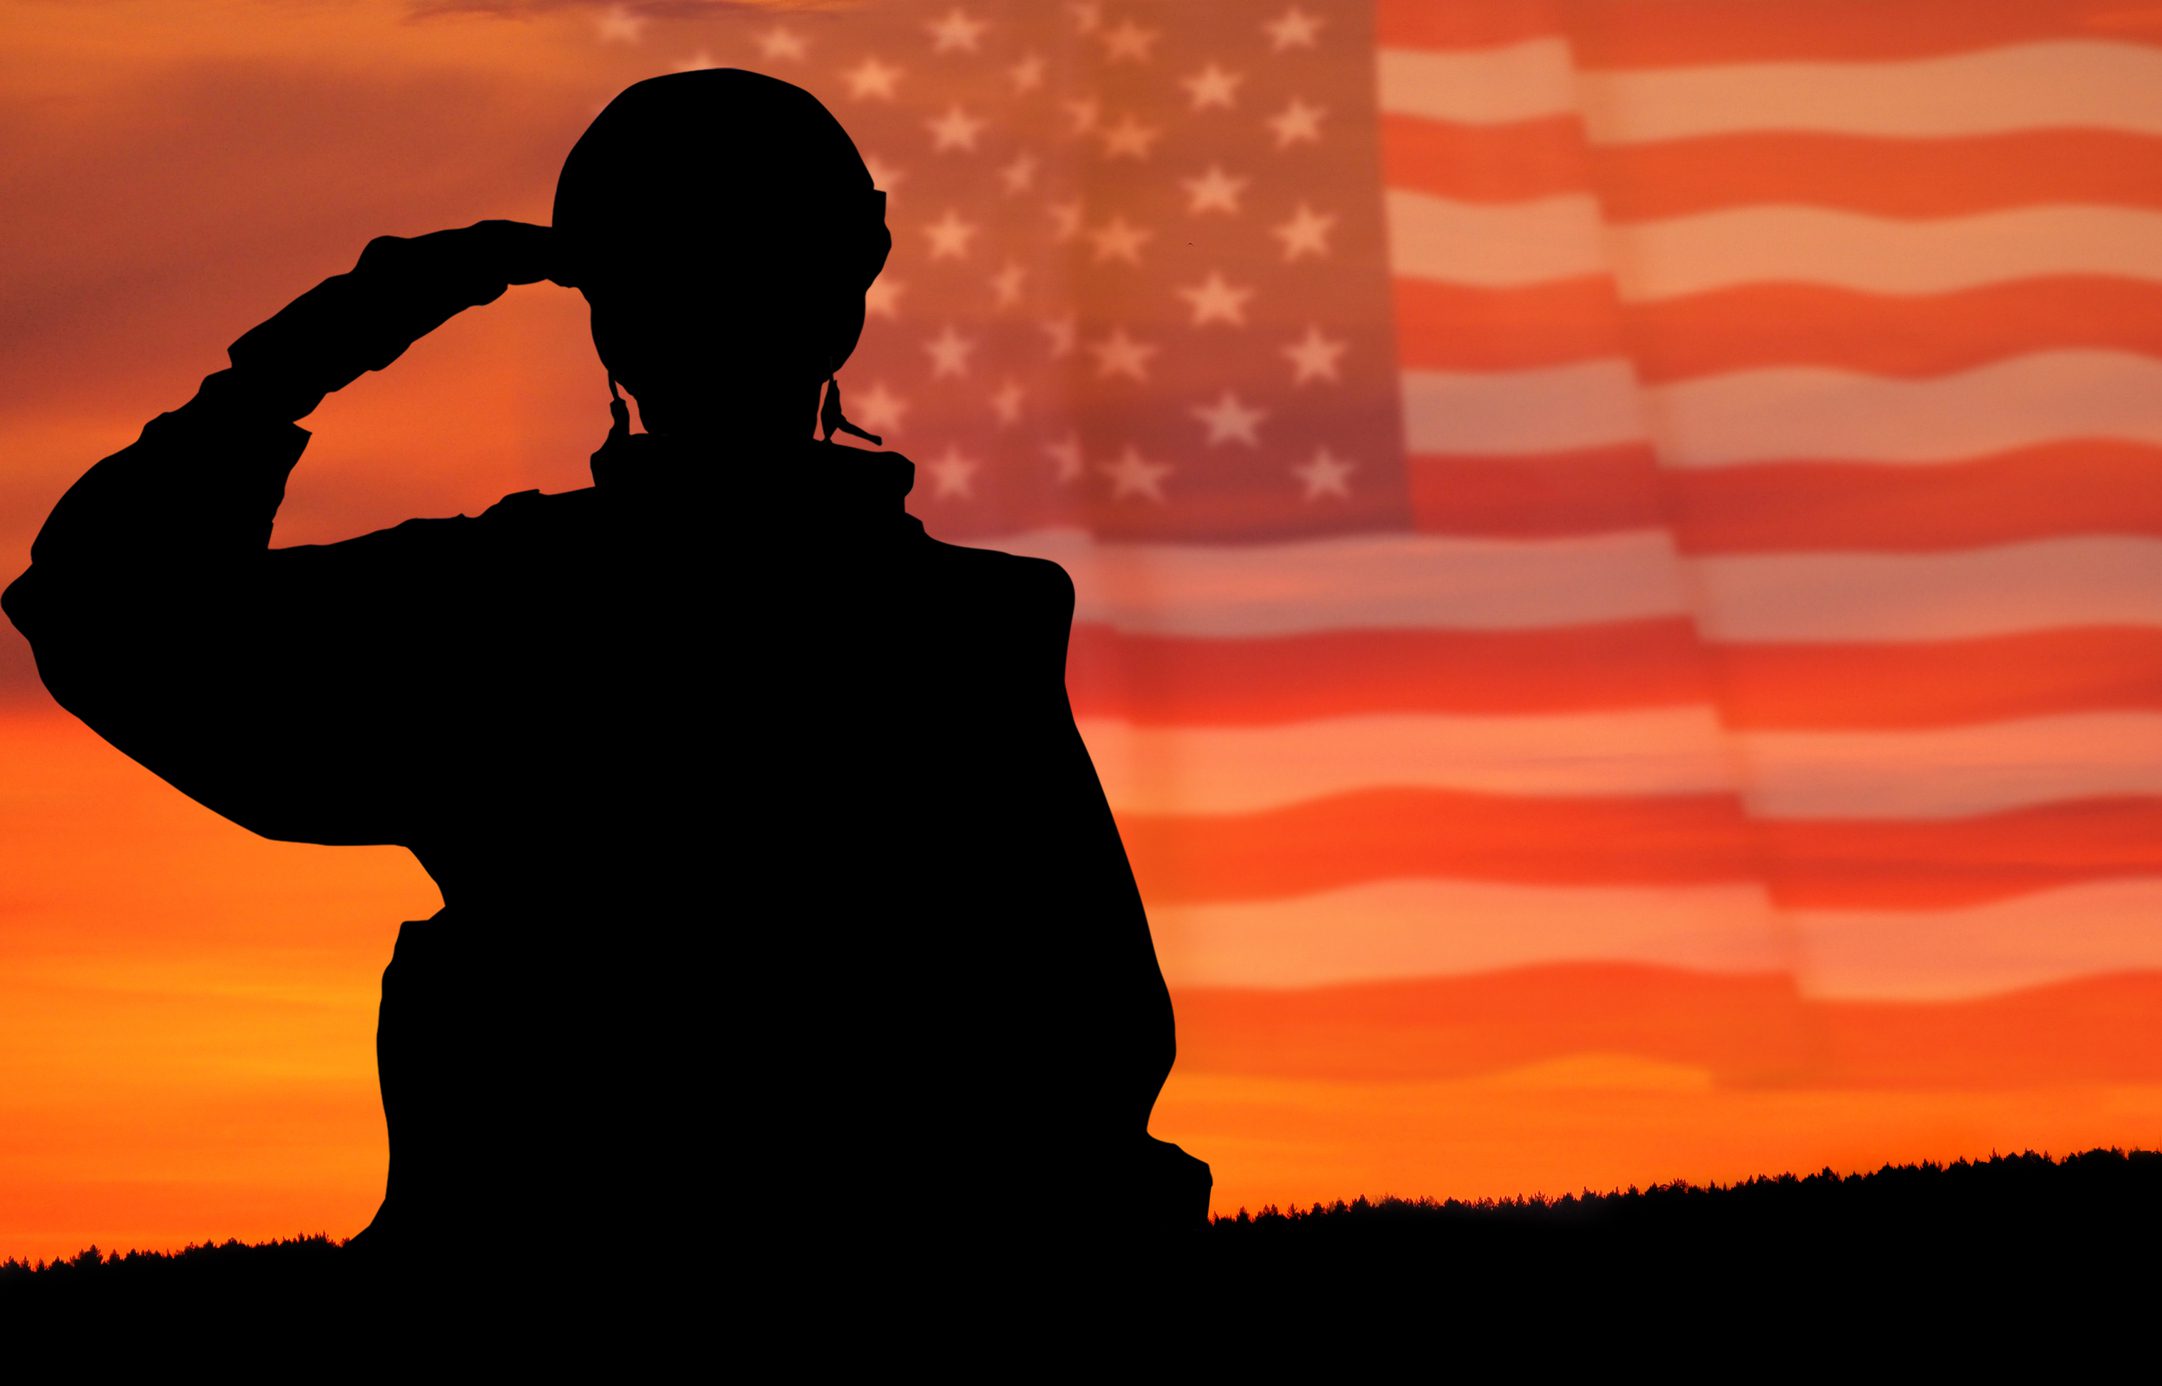 Silhouette of a soldier saluting with an American flag waving behind him